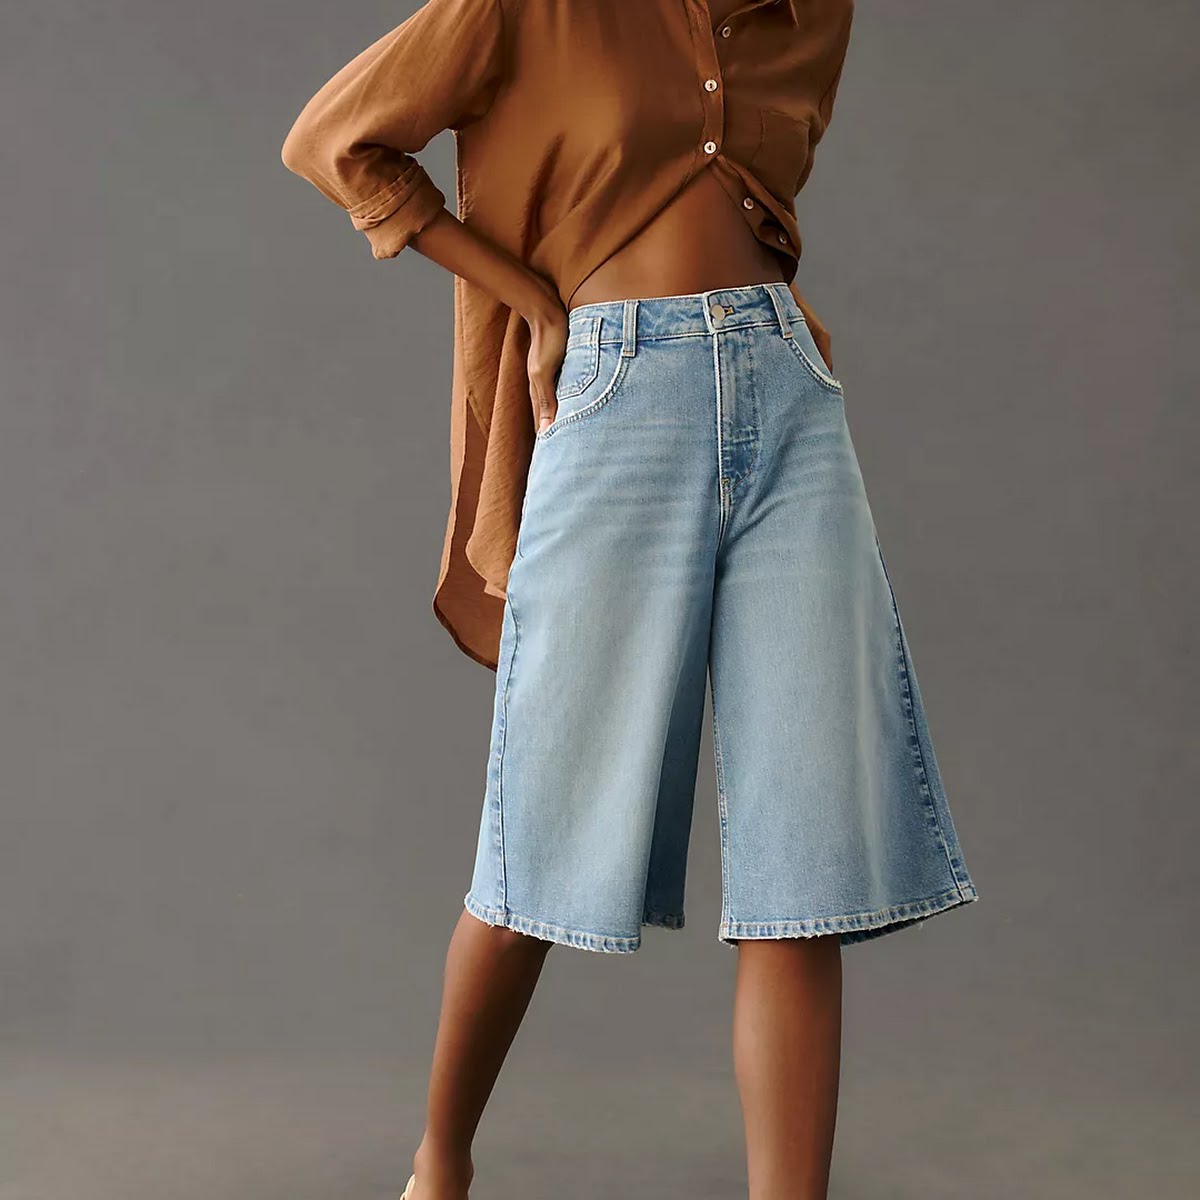 Anthropologie, Pilcro The 5-Pocket High-Rise Crop Culotte Jeans, €115